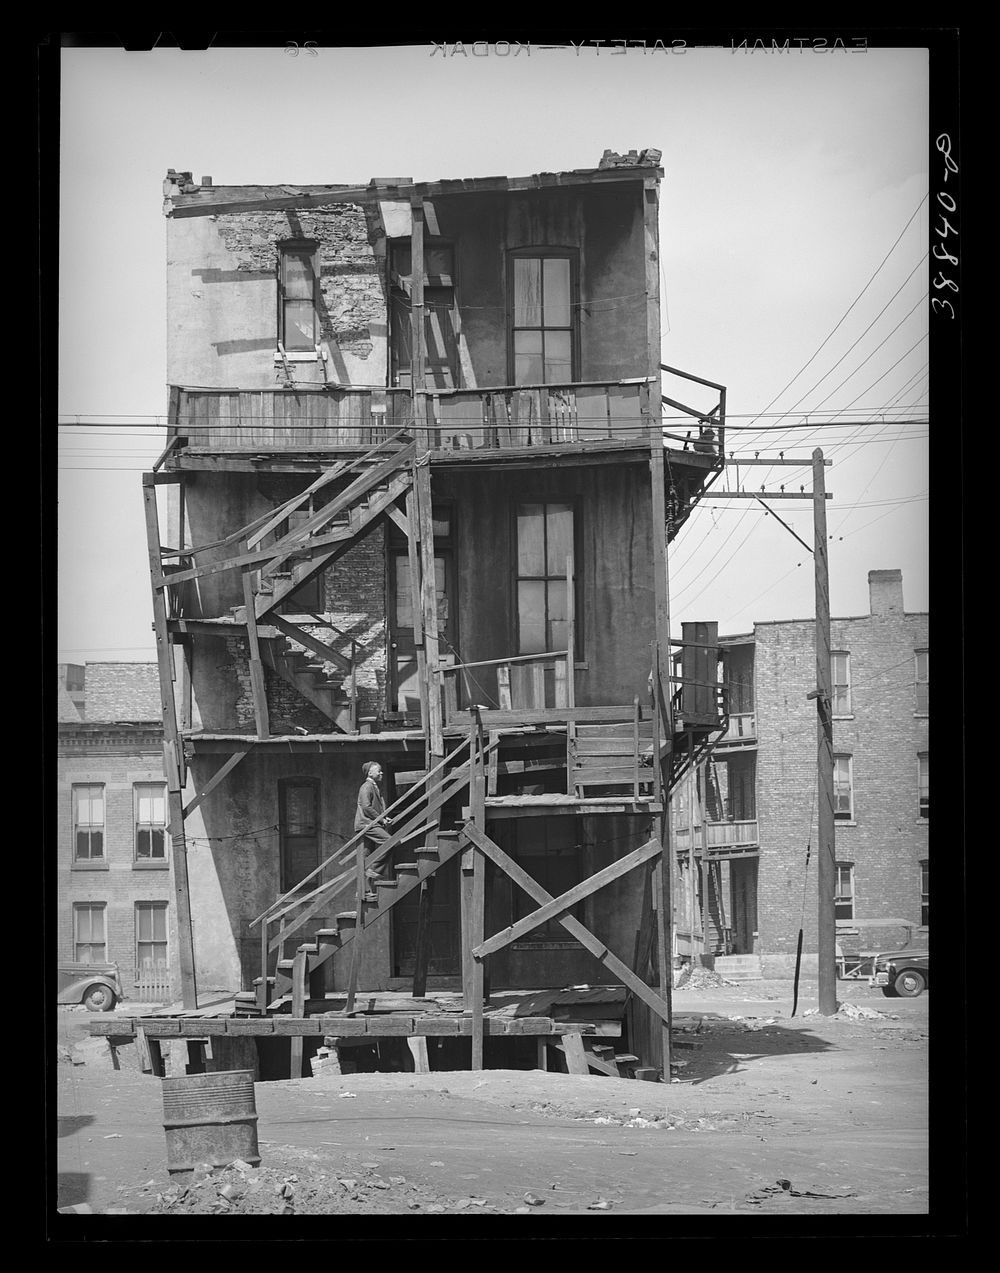 [Untitled photo, possibly related to: Back of multi-family dwellings rented to African Americans. Chicago, Illinois] by…